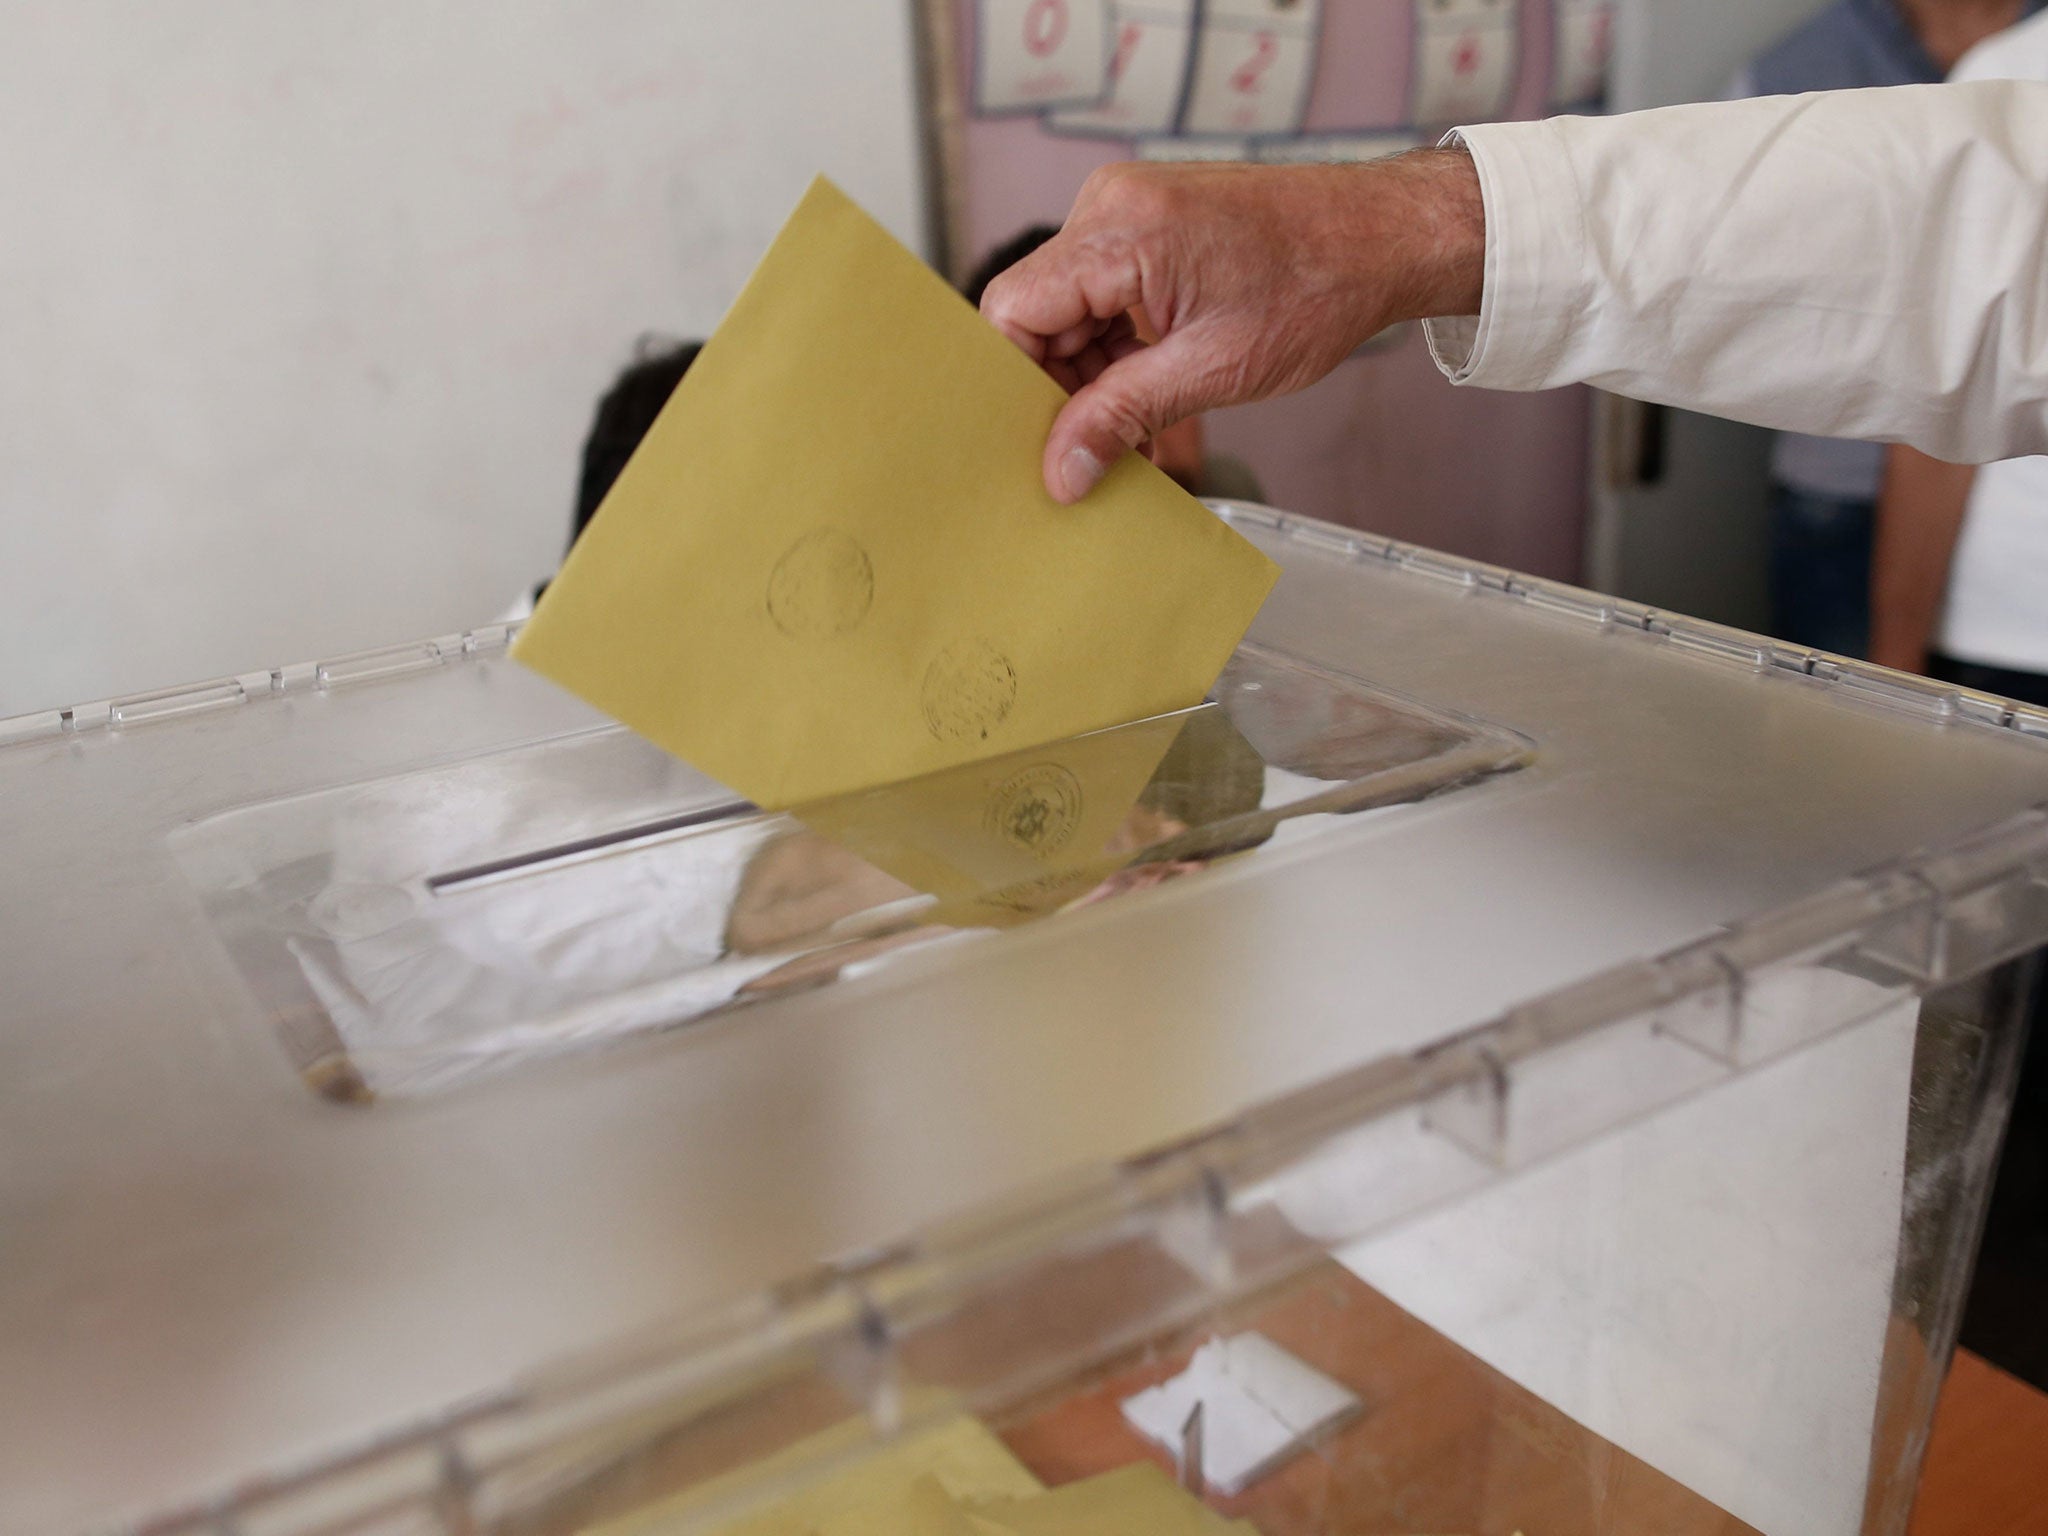 A man casts his vote at a polling station in Diyarbakir, Turkey on 07 June 2015